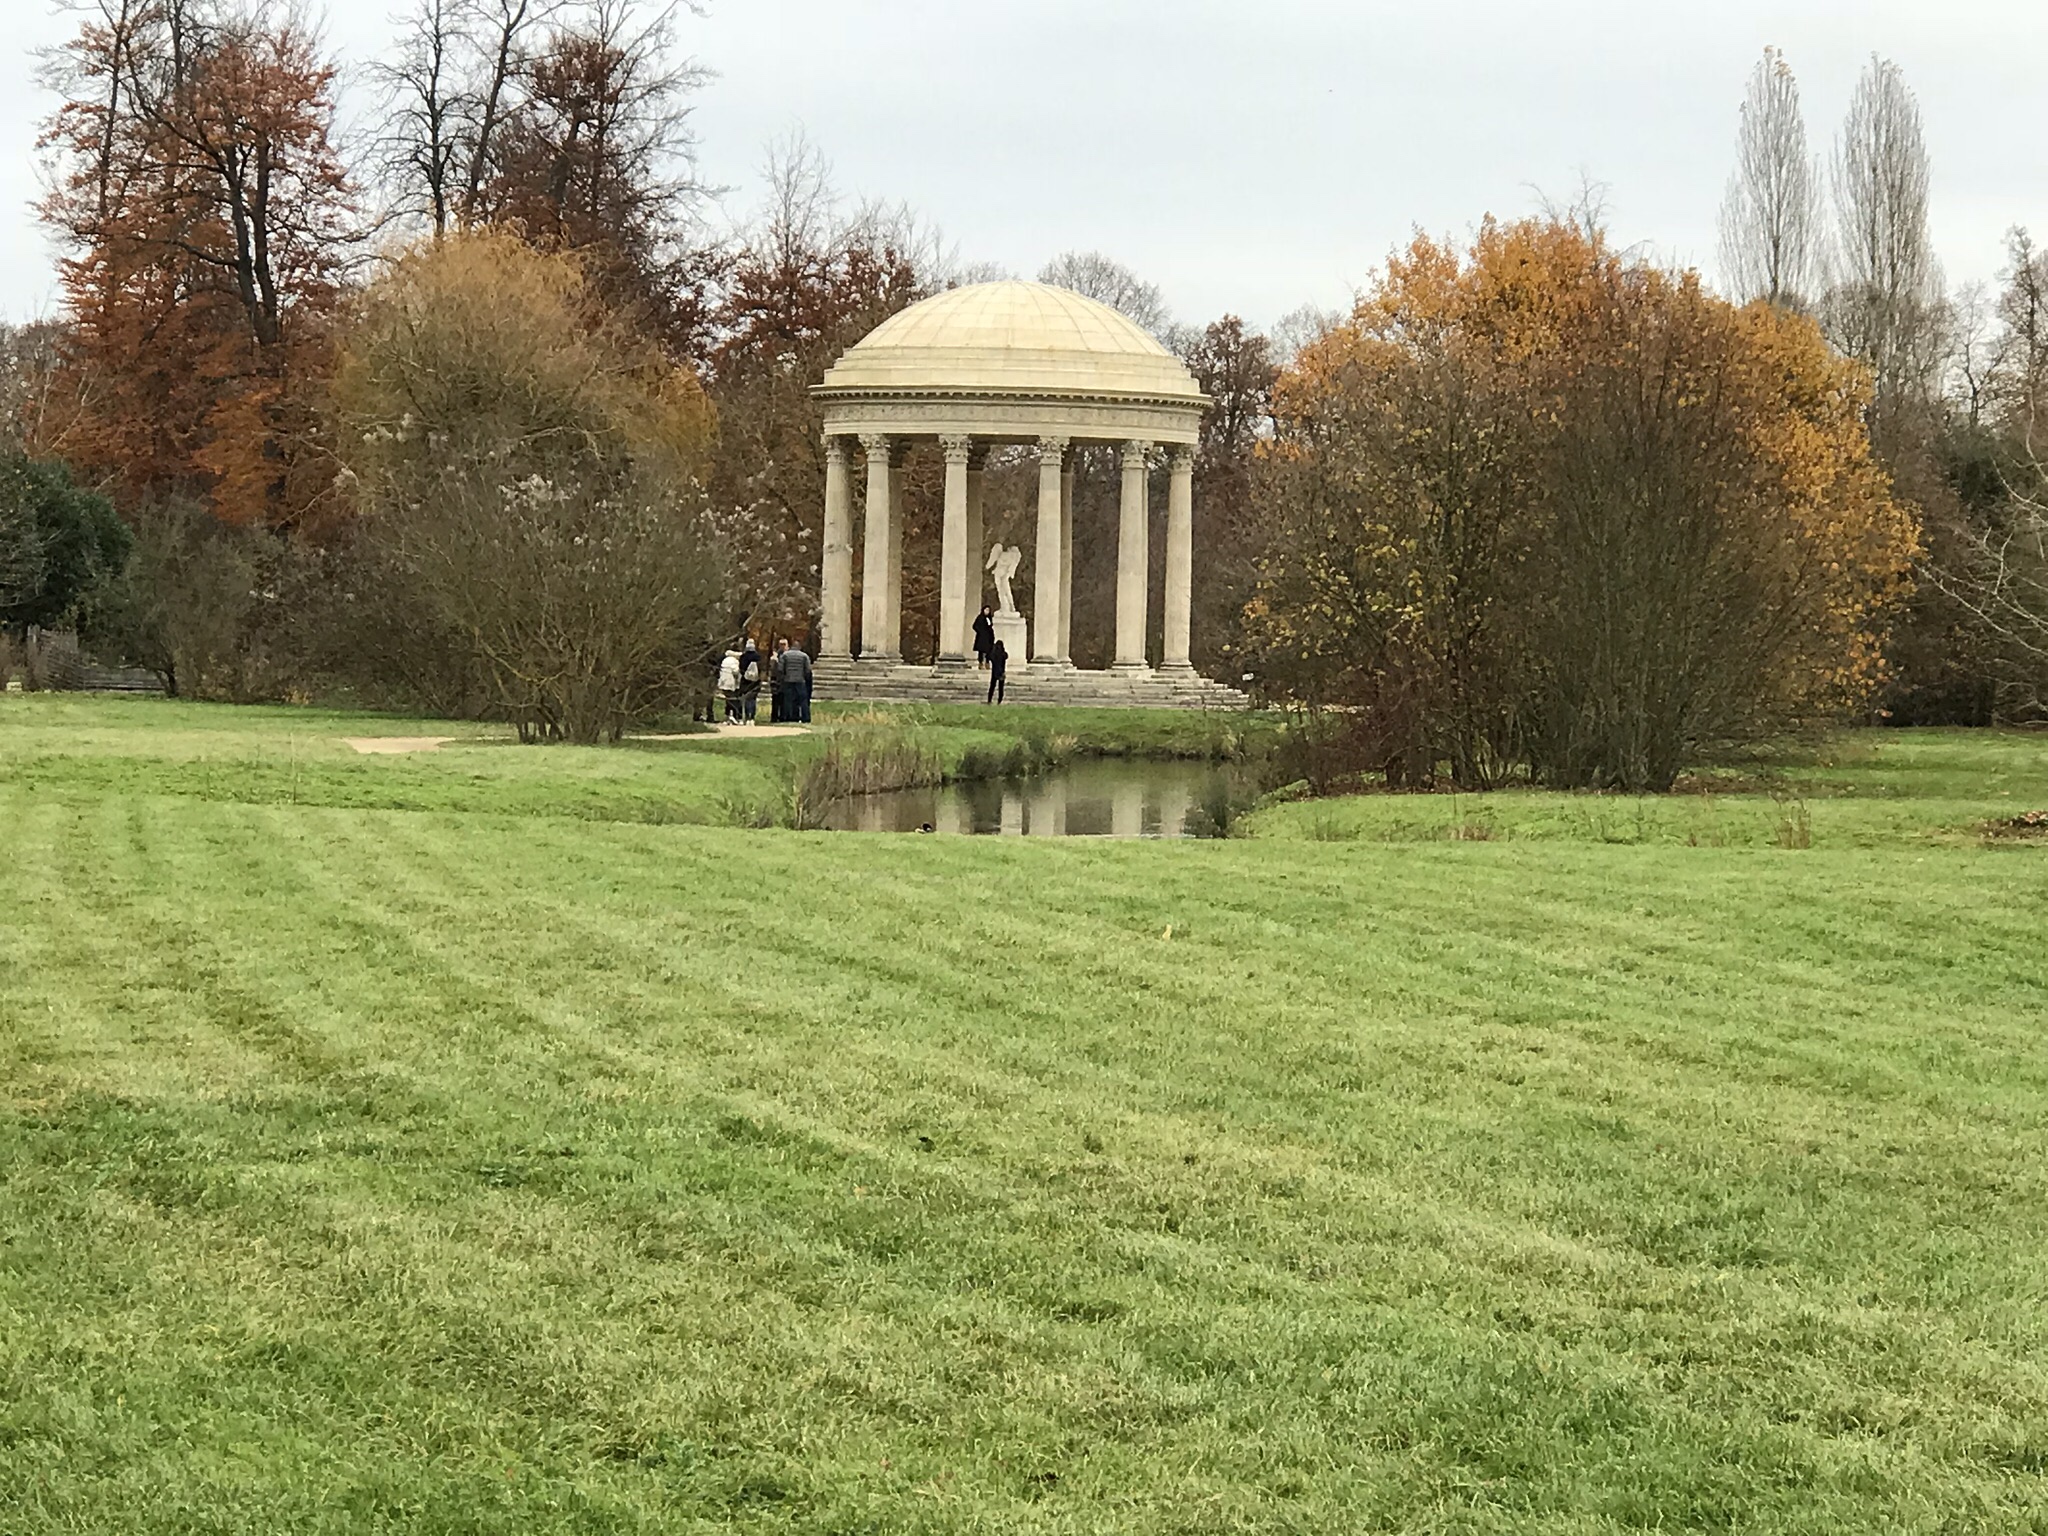 Palace of Versailles's grounds is just as gorgeous as the interiors. The weather cleared up and we enjoyed a lovely golf cart ride and walk.